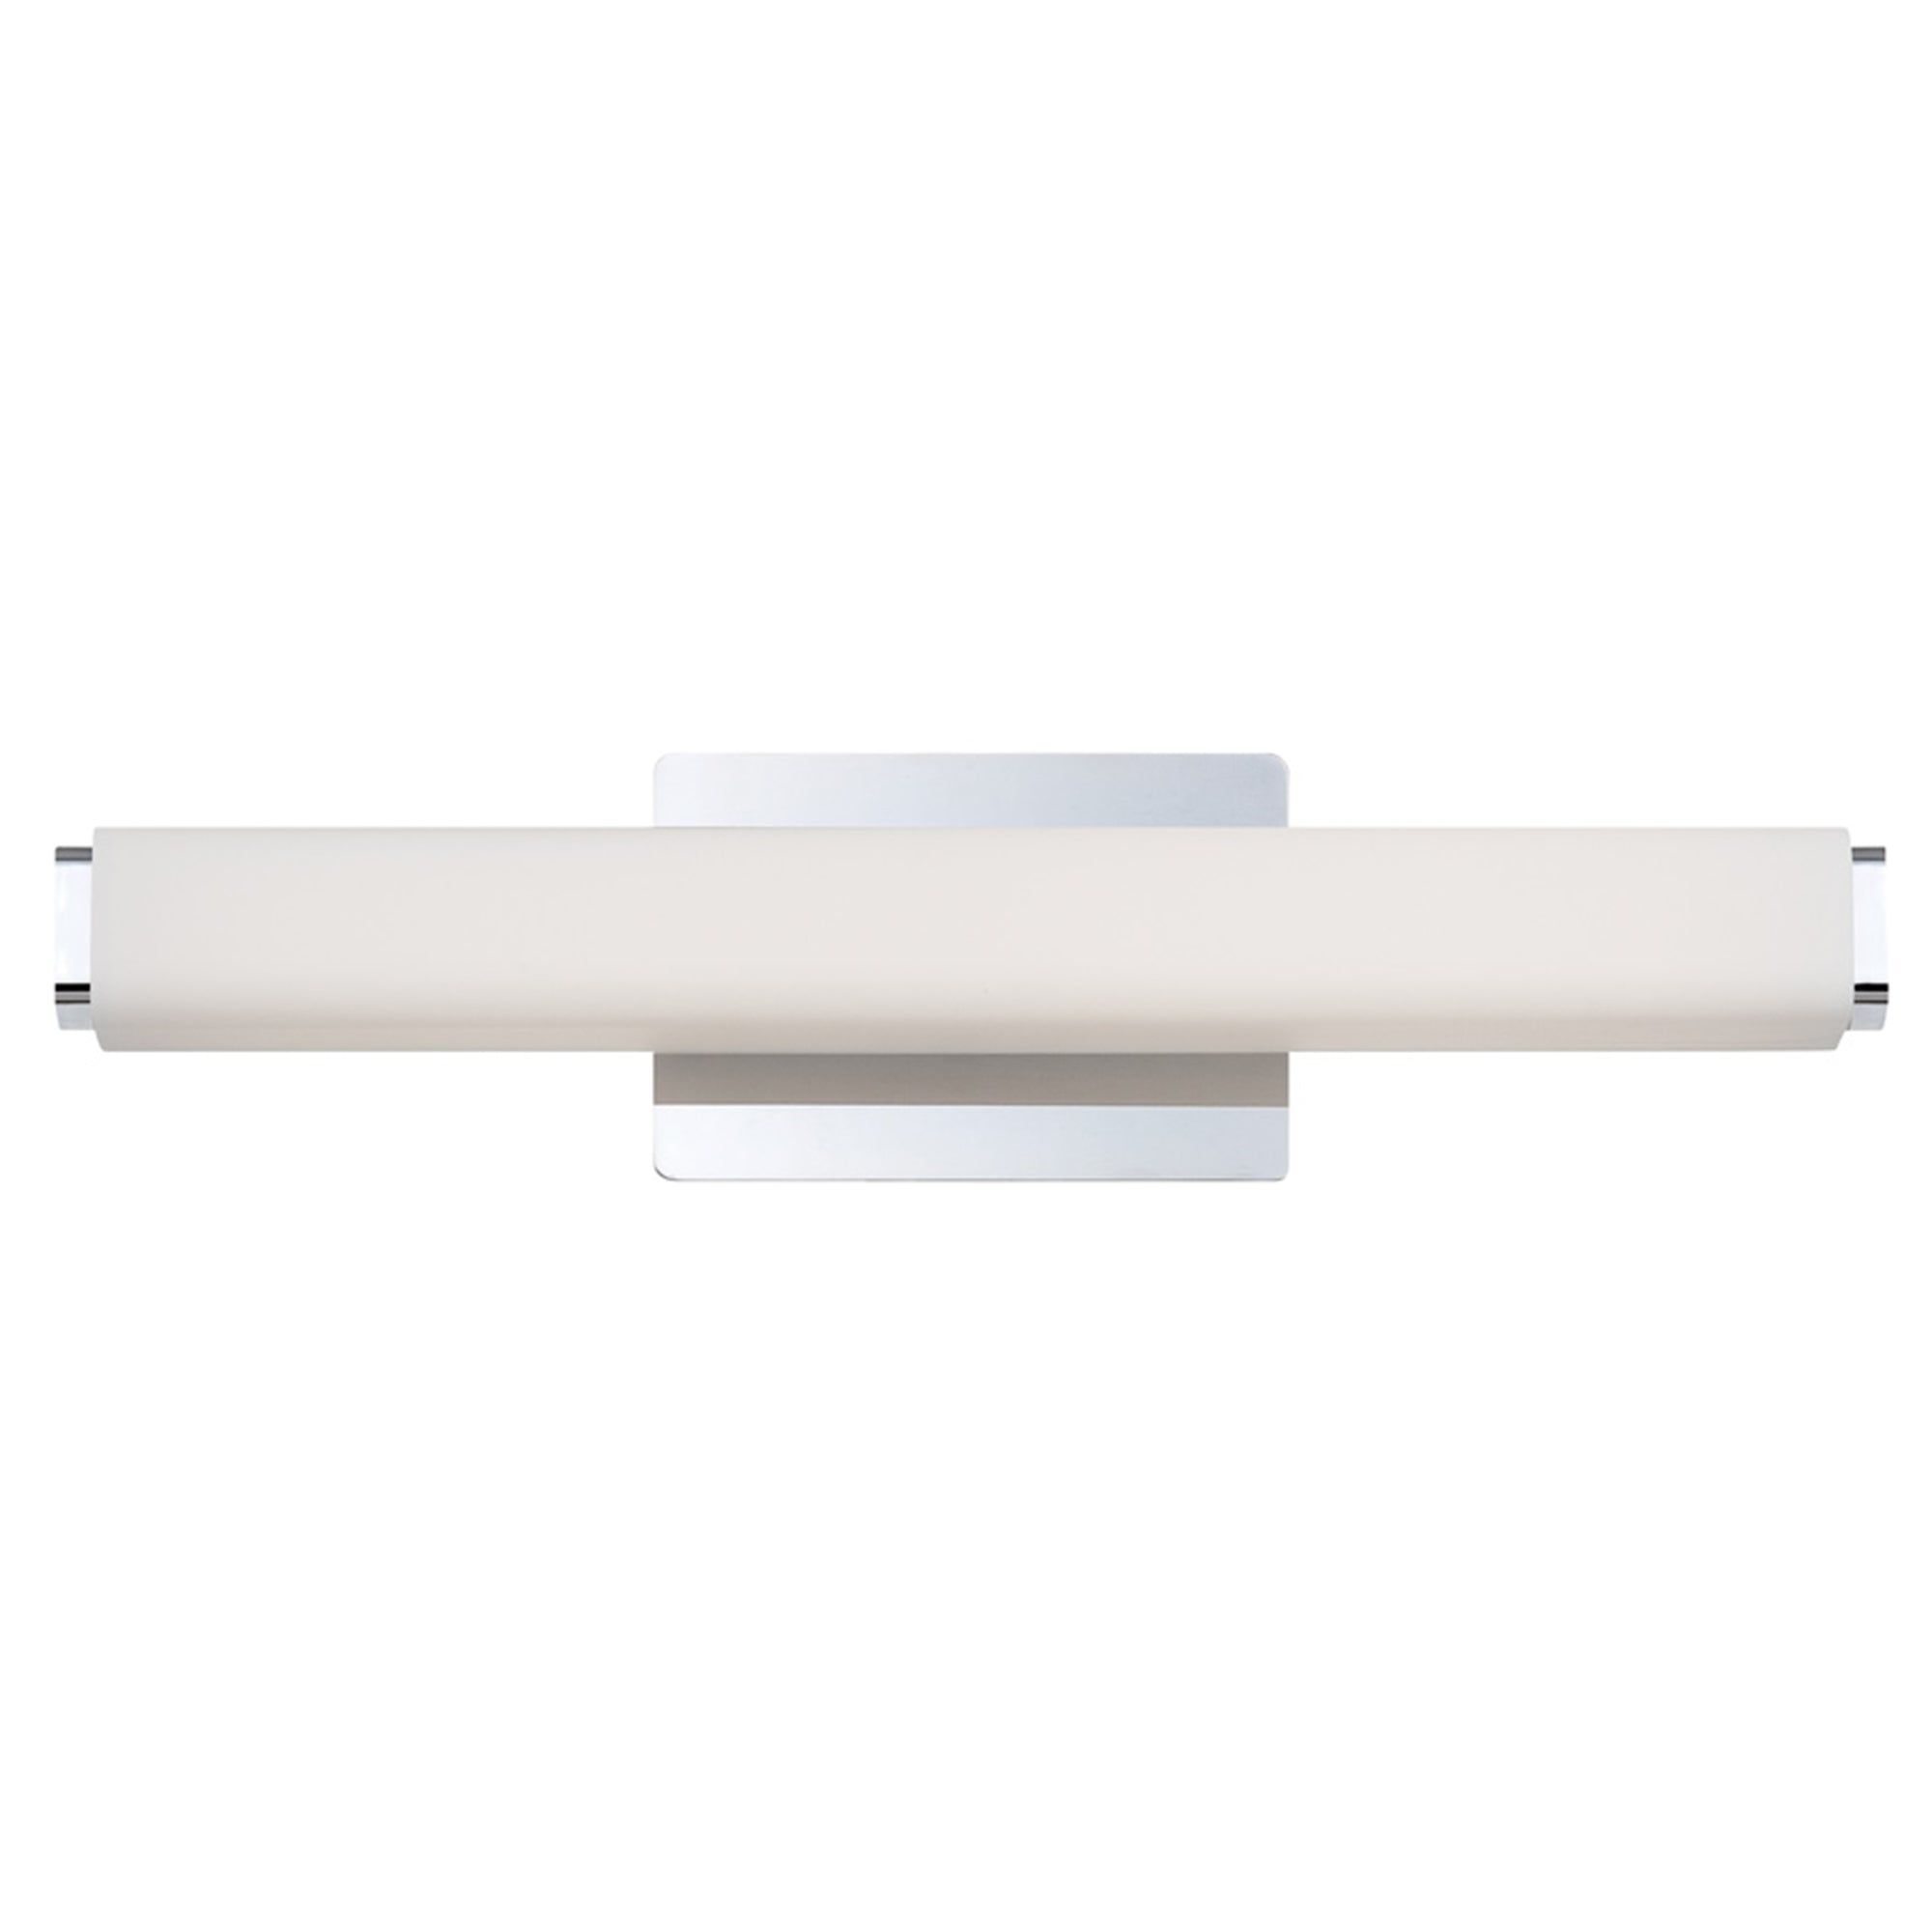 VOGUE Bathroom sconce Chrome INTEGRATED LED - WS-3120-35-CH | MODERN FORMS